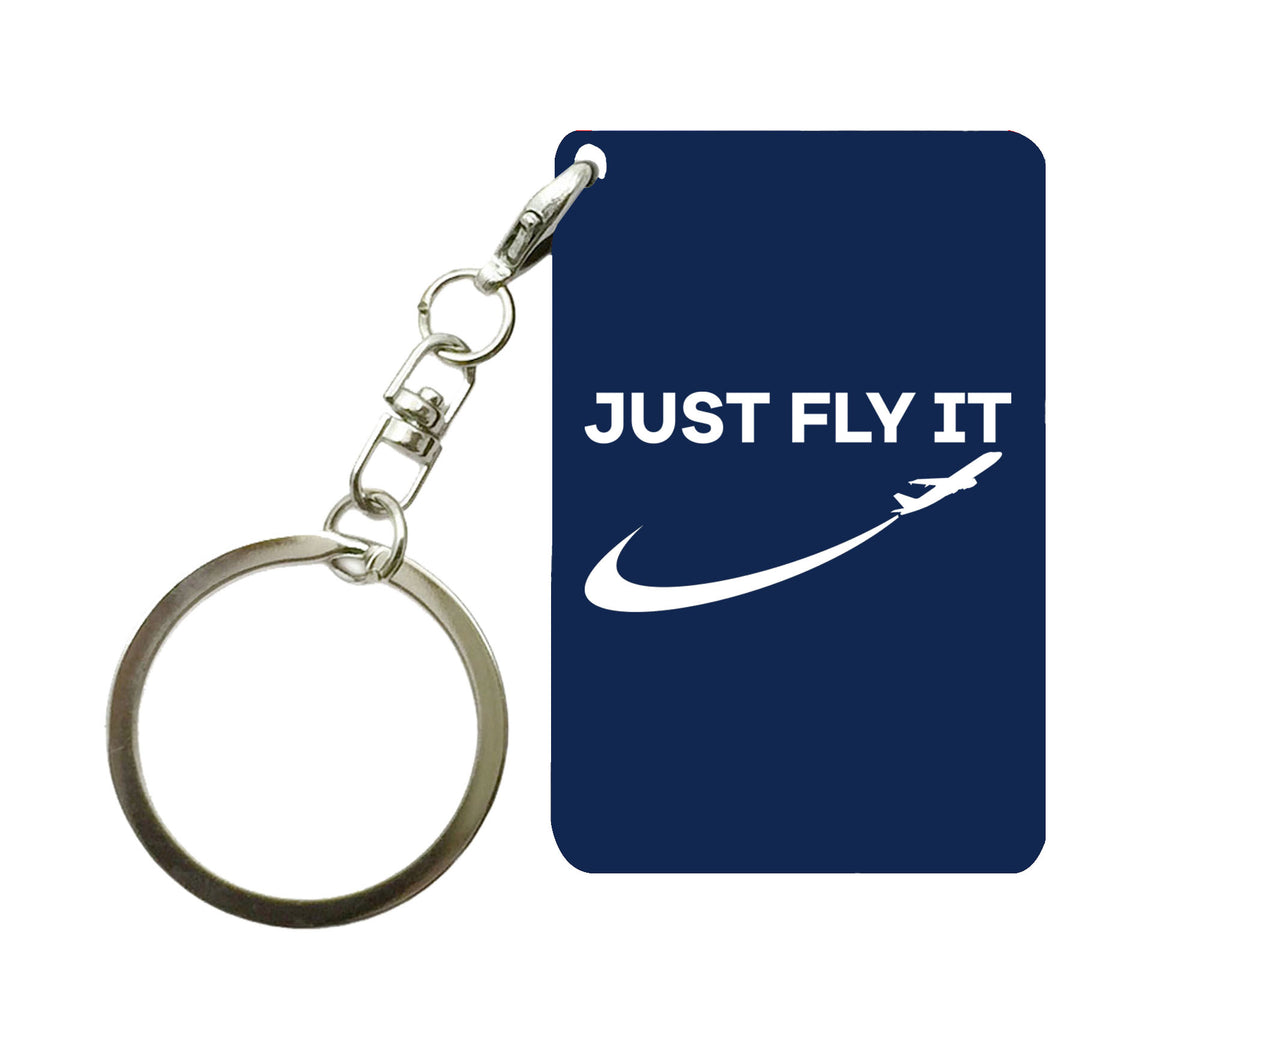 Just Fly It 2 Designed Key Chains